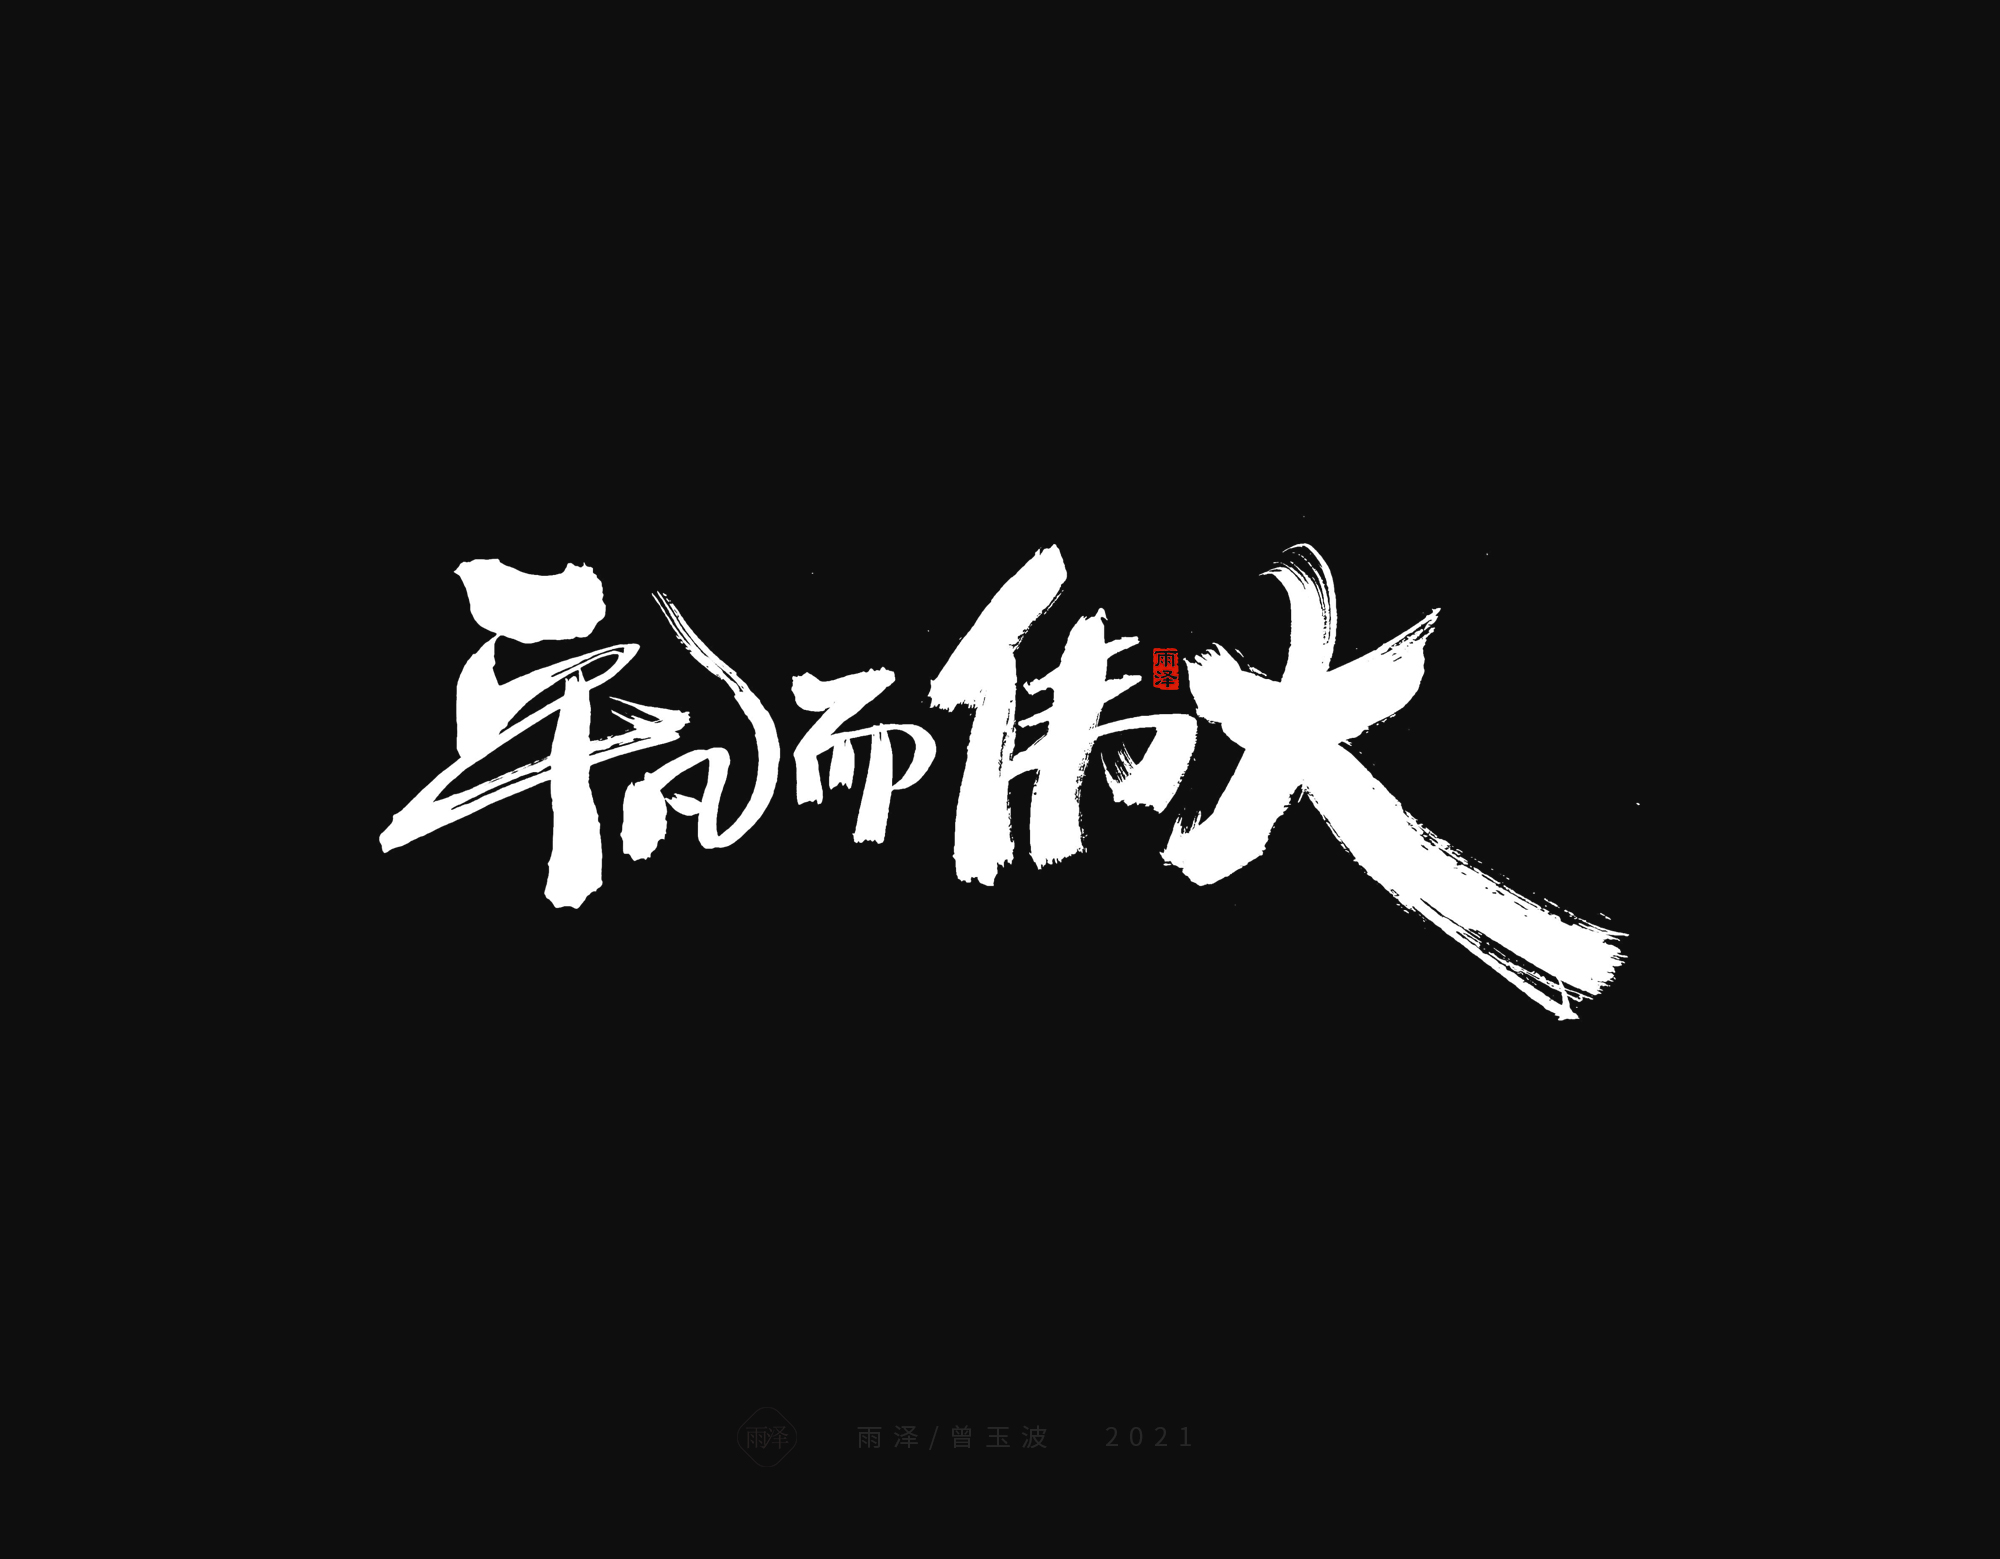 23P Collection of the latest Chinese font design schemes in 2021 #.122